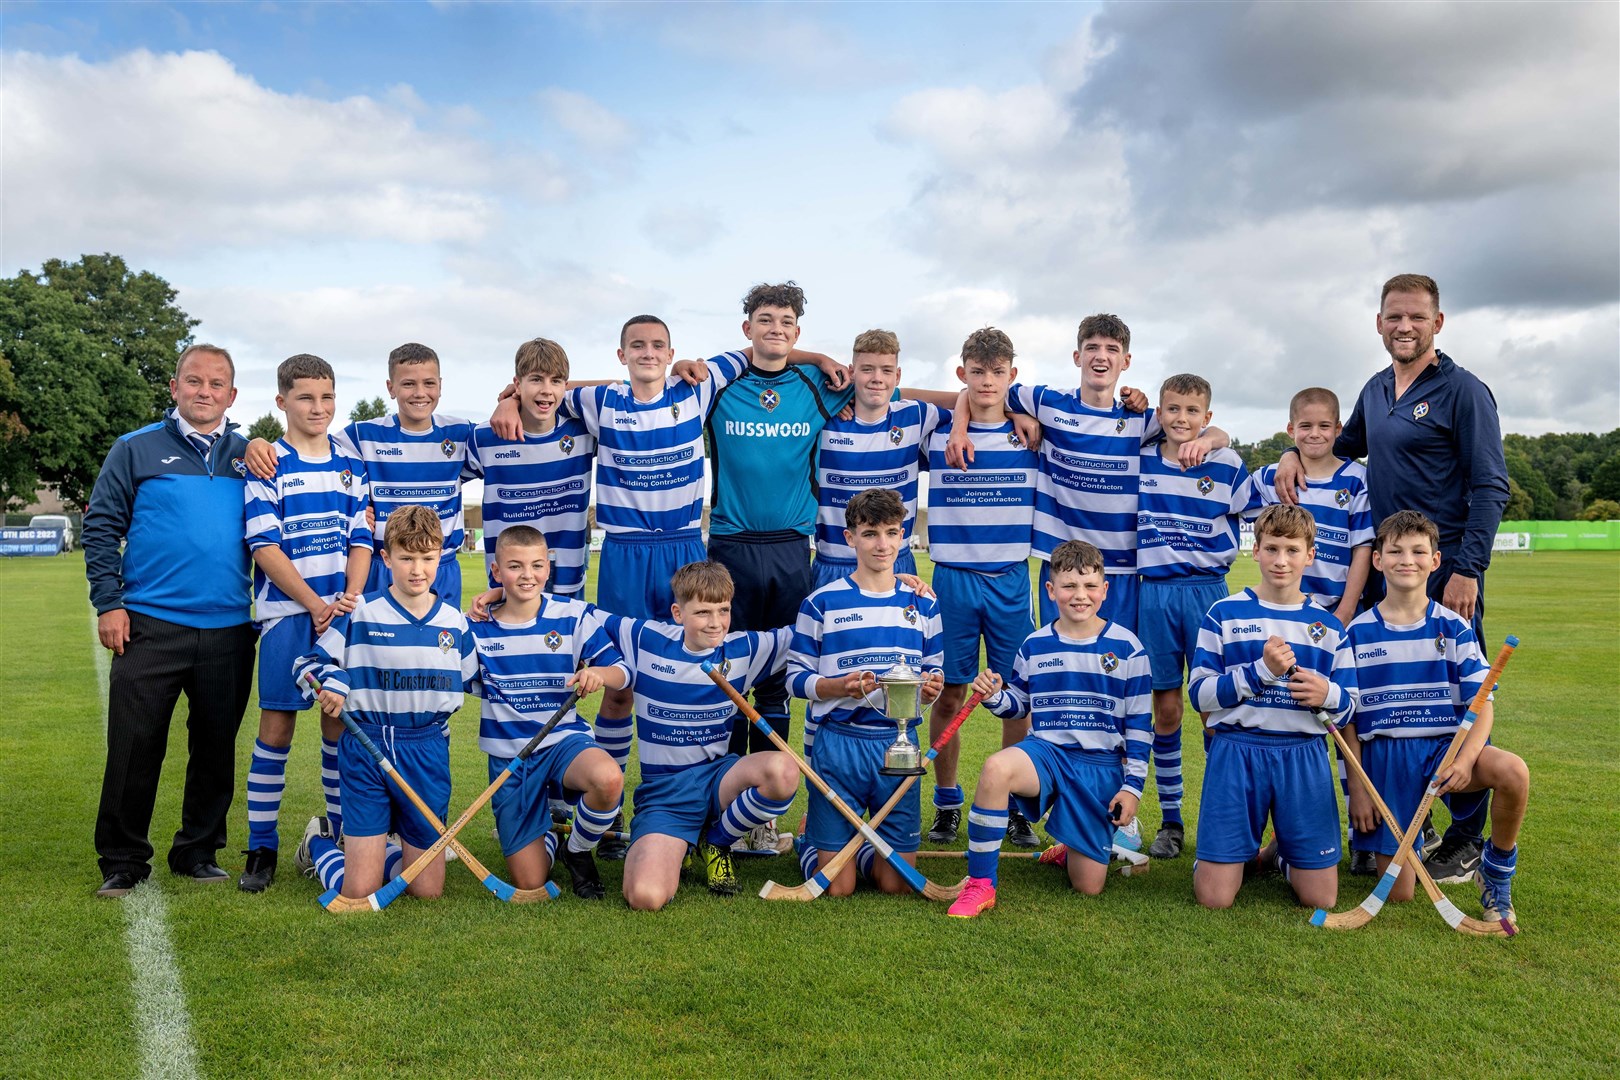 The victorious Newtonmore team who lifted the U14 MacMaster Cup last weekend at The Bught, Inverness.